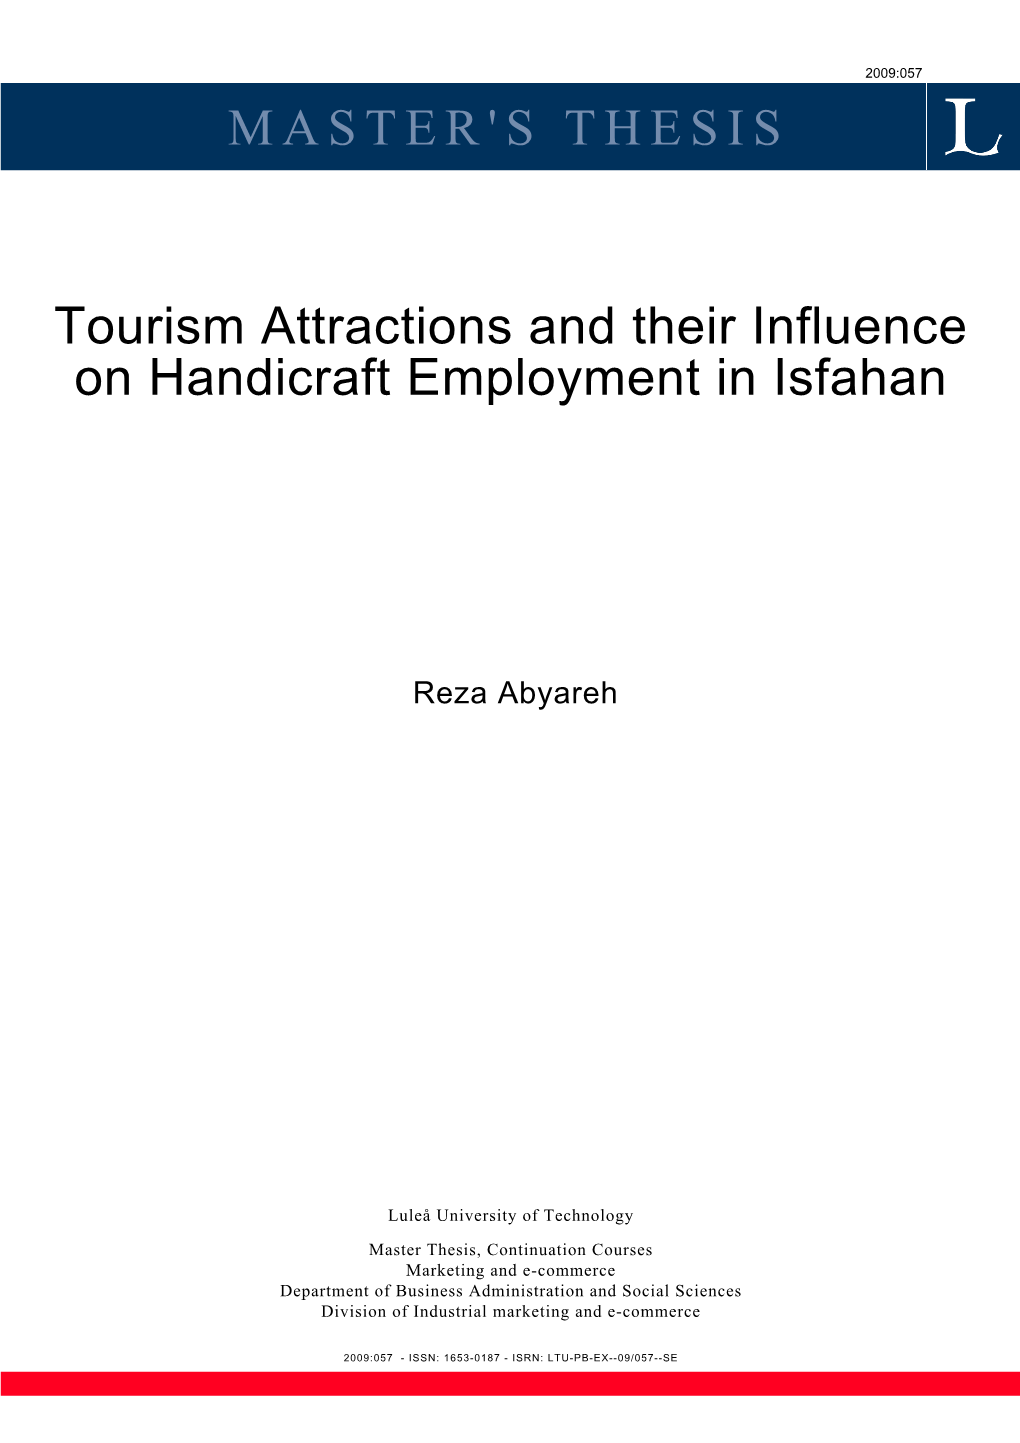 MASTER's THESIS Tourism Attractions and Their Influence On